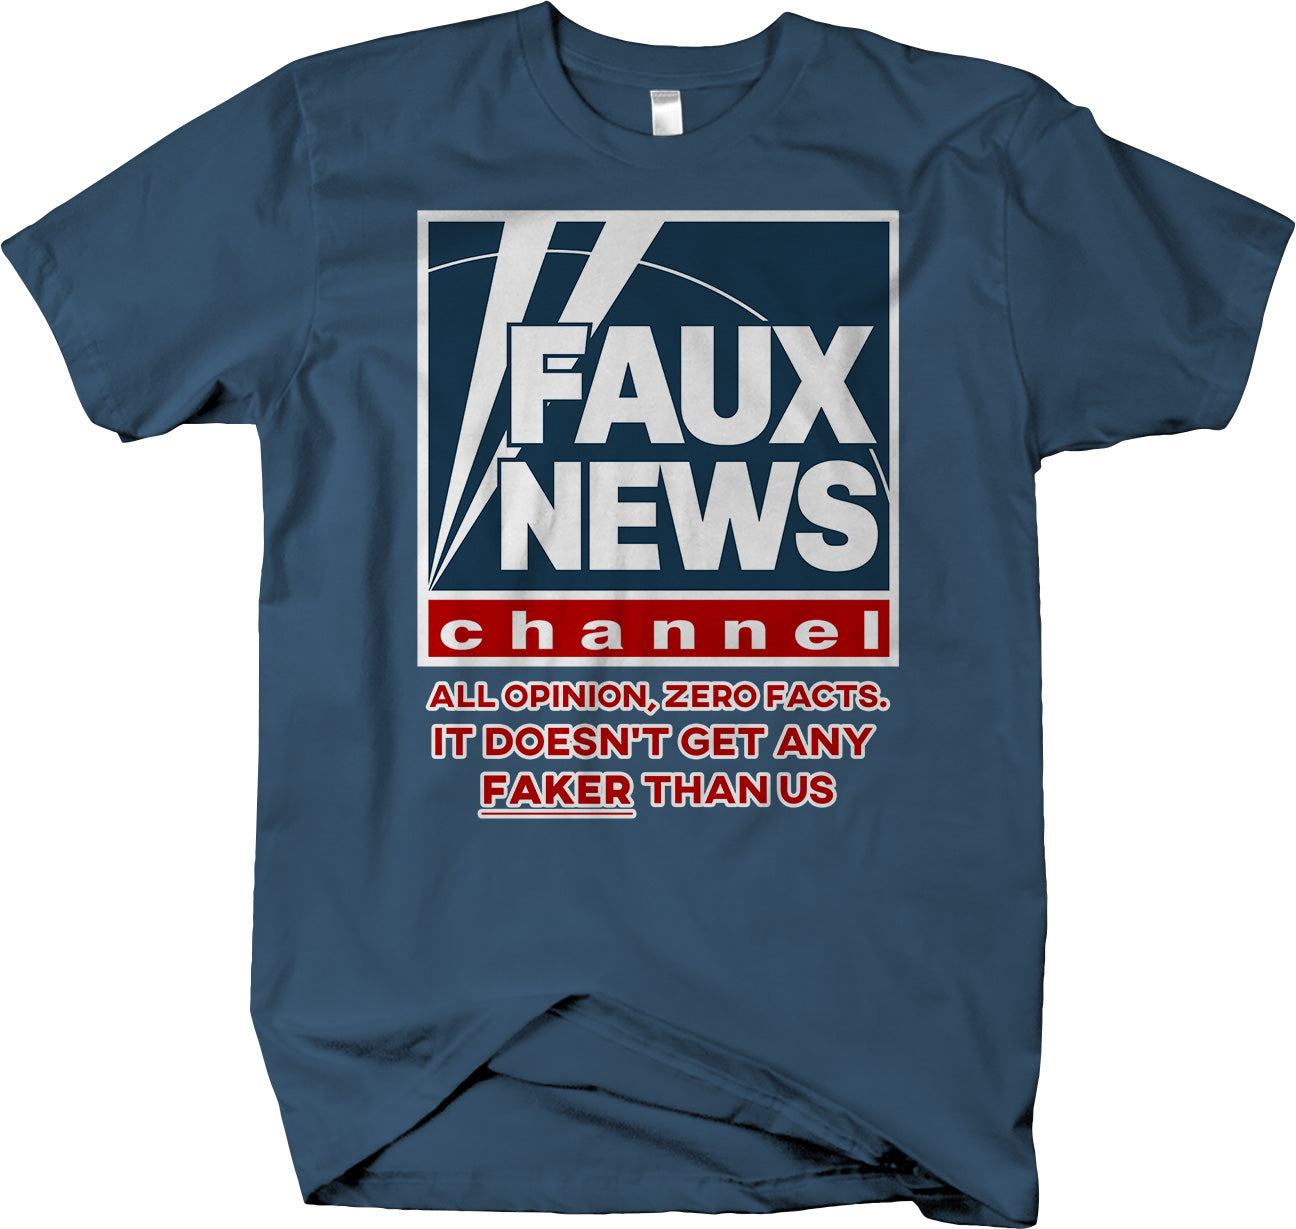 Faux News - Funny Political Humor T-shirt Anti Trump - Larger Sizes